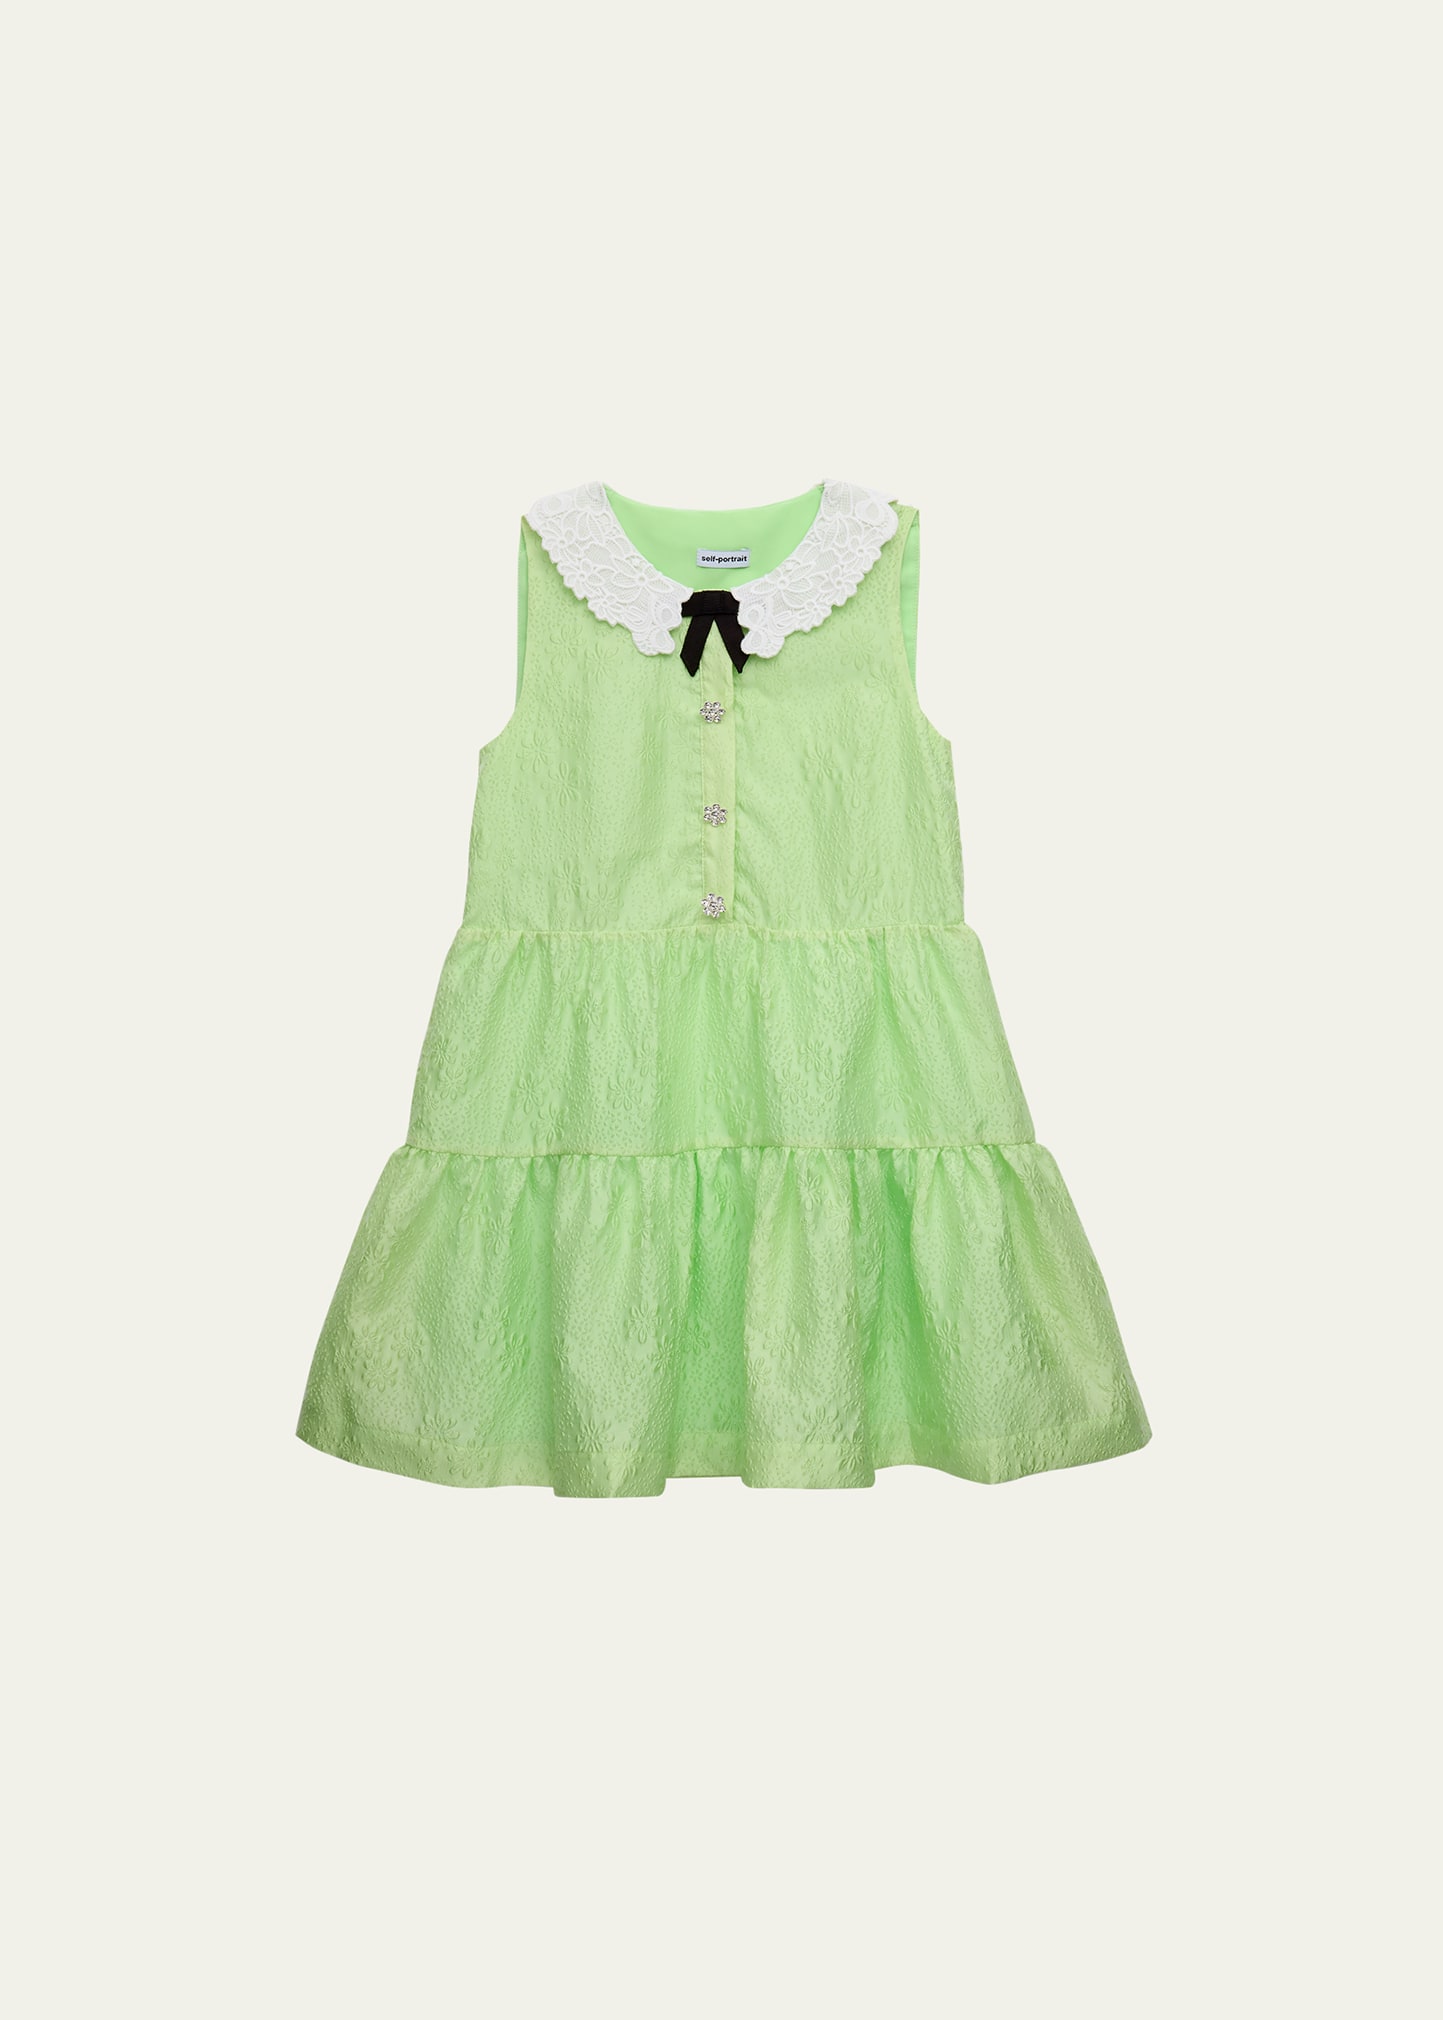 Girl's Tiered Lace Collar Cotton Dress, Size 3T-12